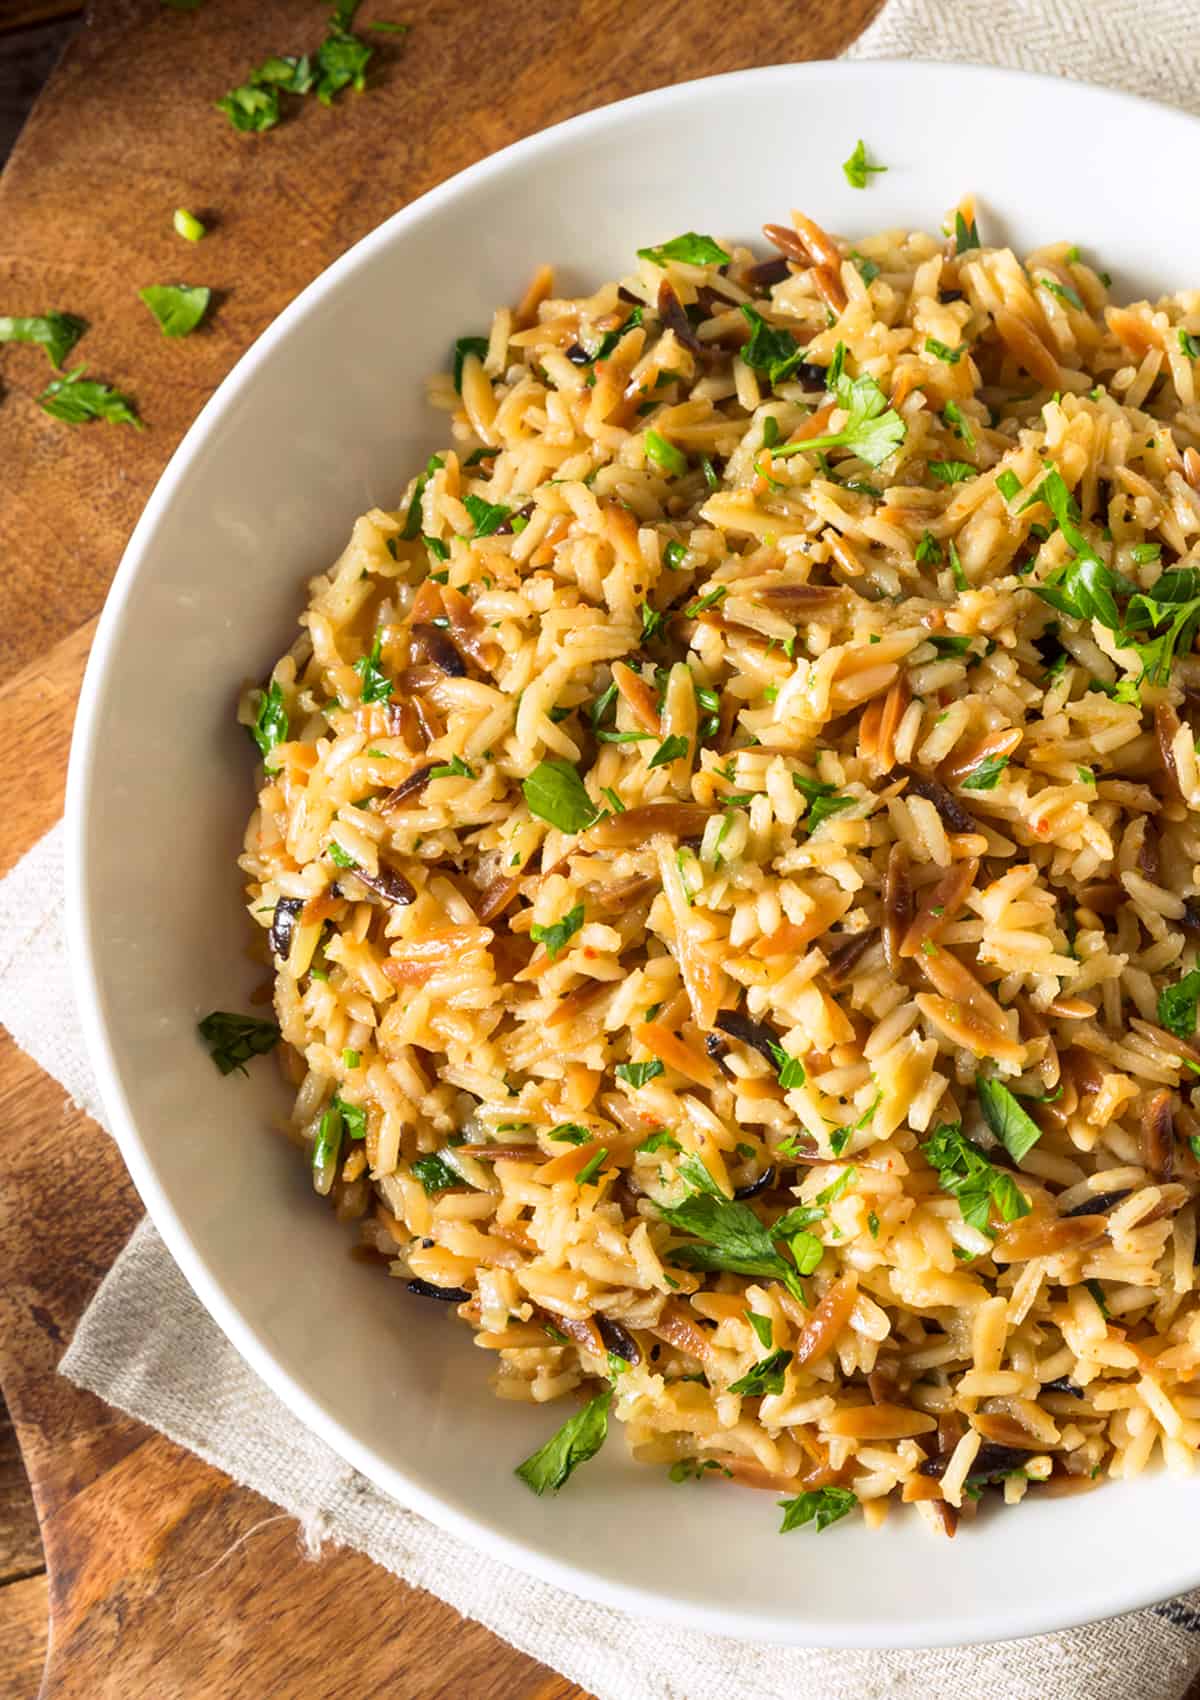 rice a roni recipe homemade copycat from scratch vermicelli pasta orzo nuts walnuts